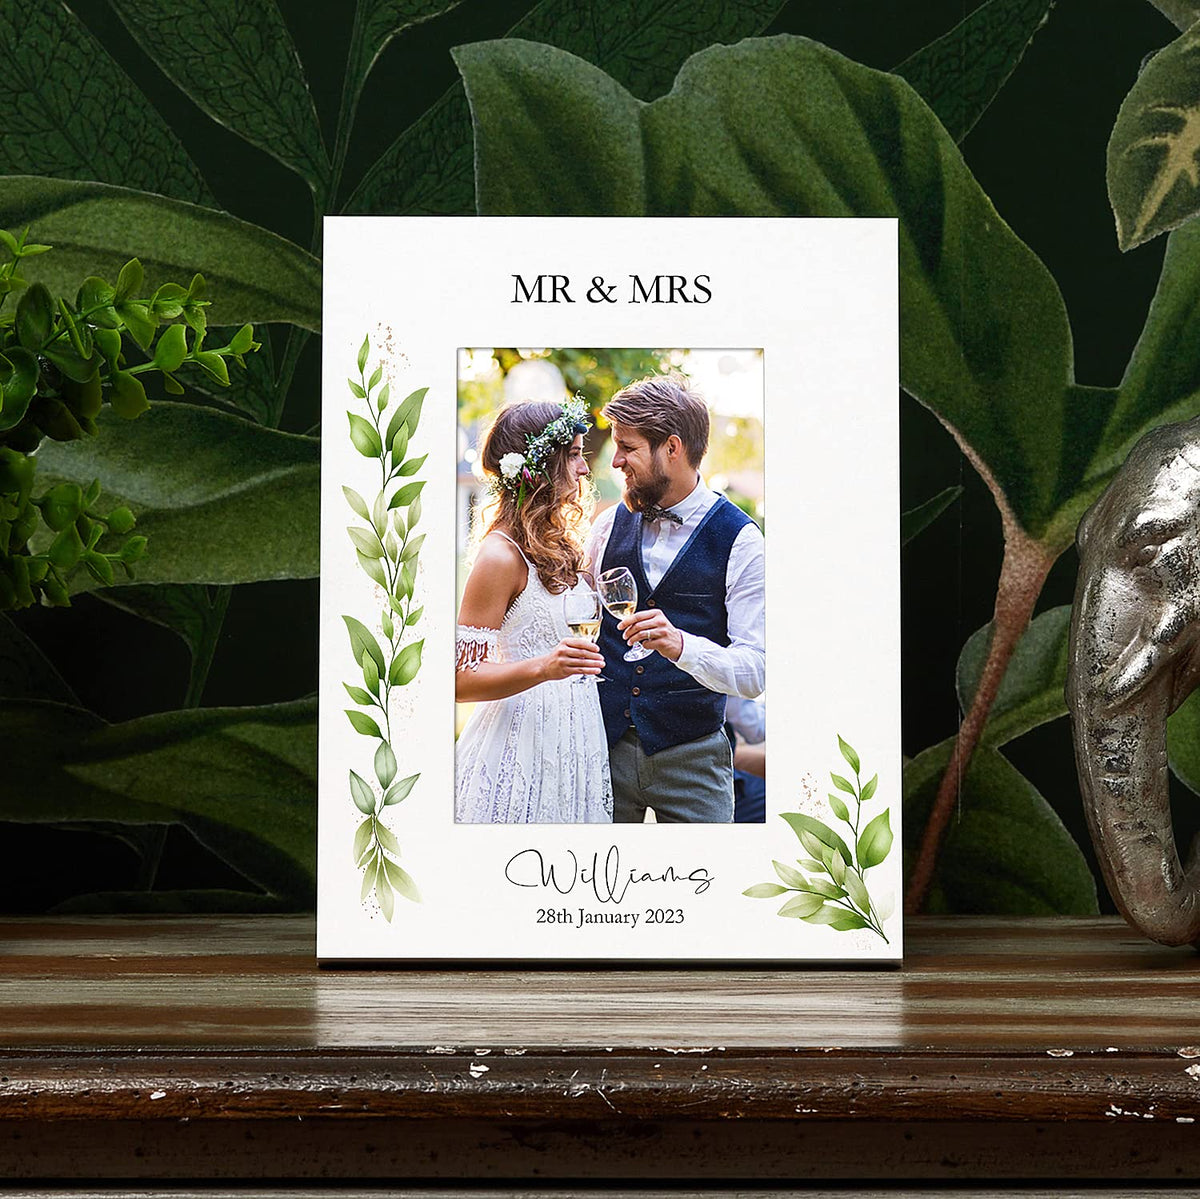 Personalised White Wedding Photo Picture Frame With Green Leaf Design